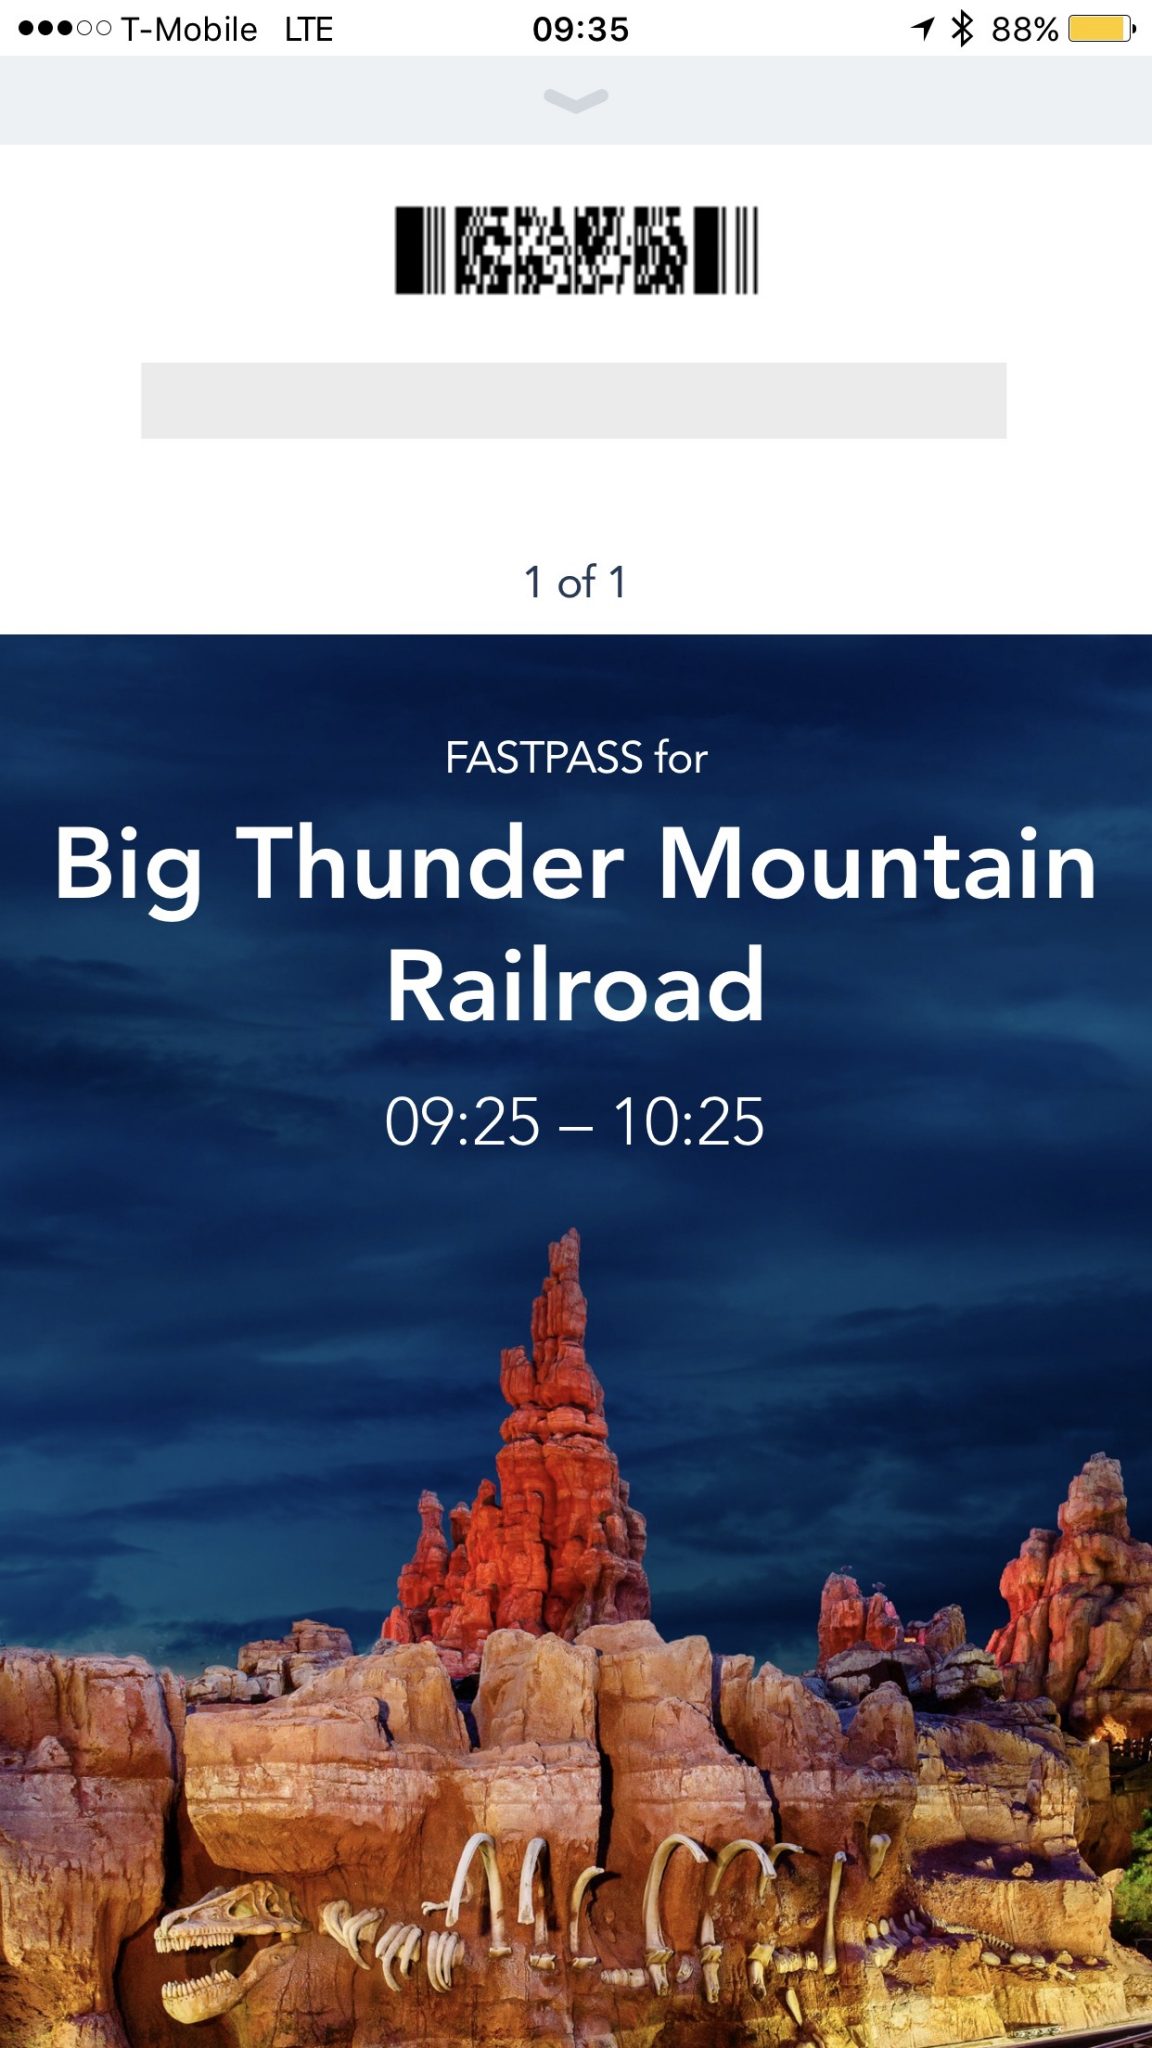 A First Day Guide to MaxPass at Disneyland